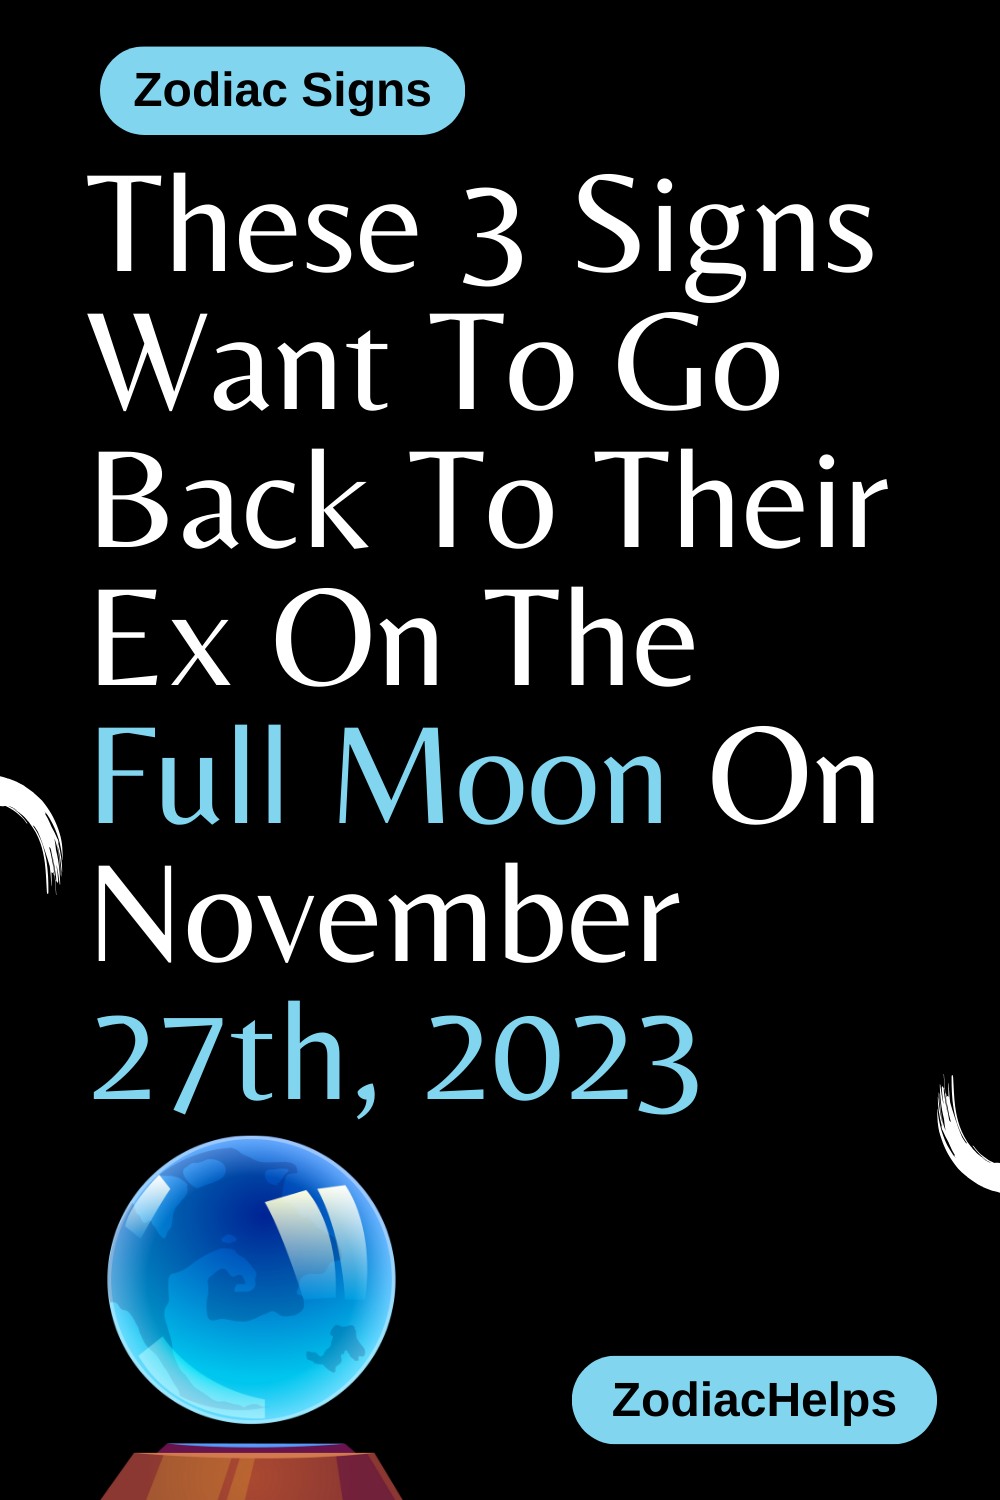 These 3 Signs Want To Go Back To Their Ex On The Full Moon On November 27th, 2023